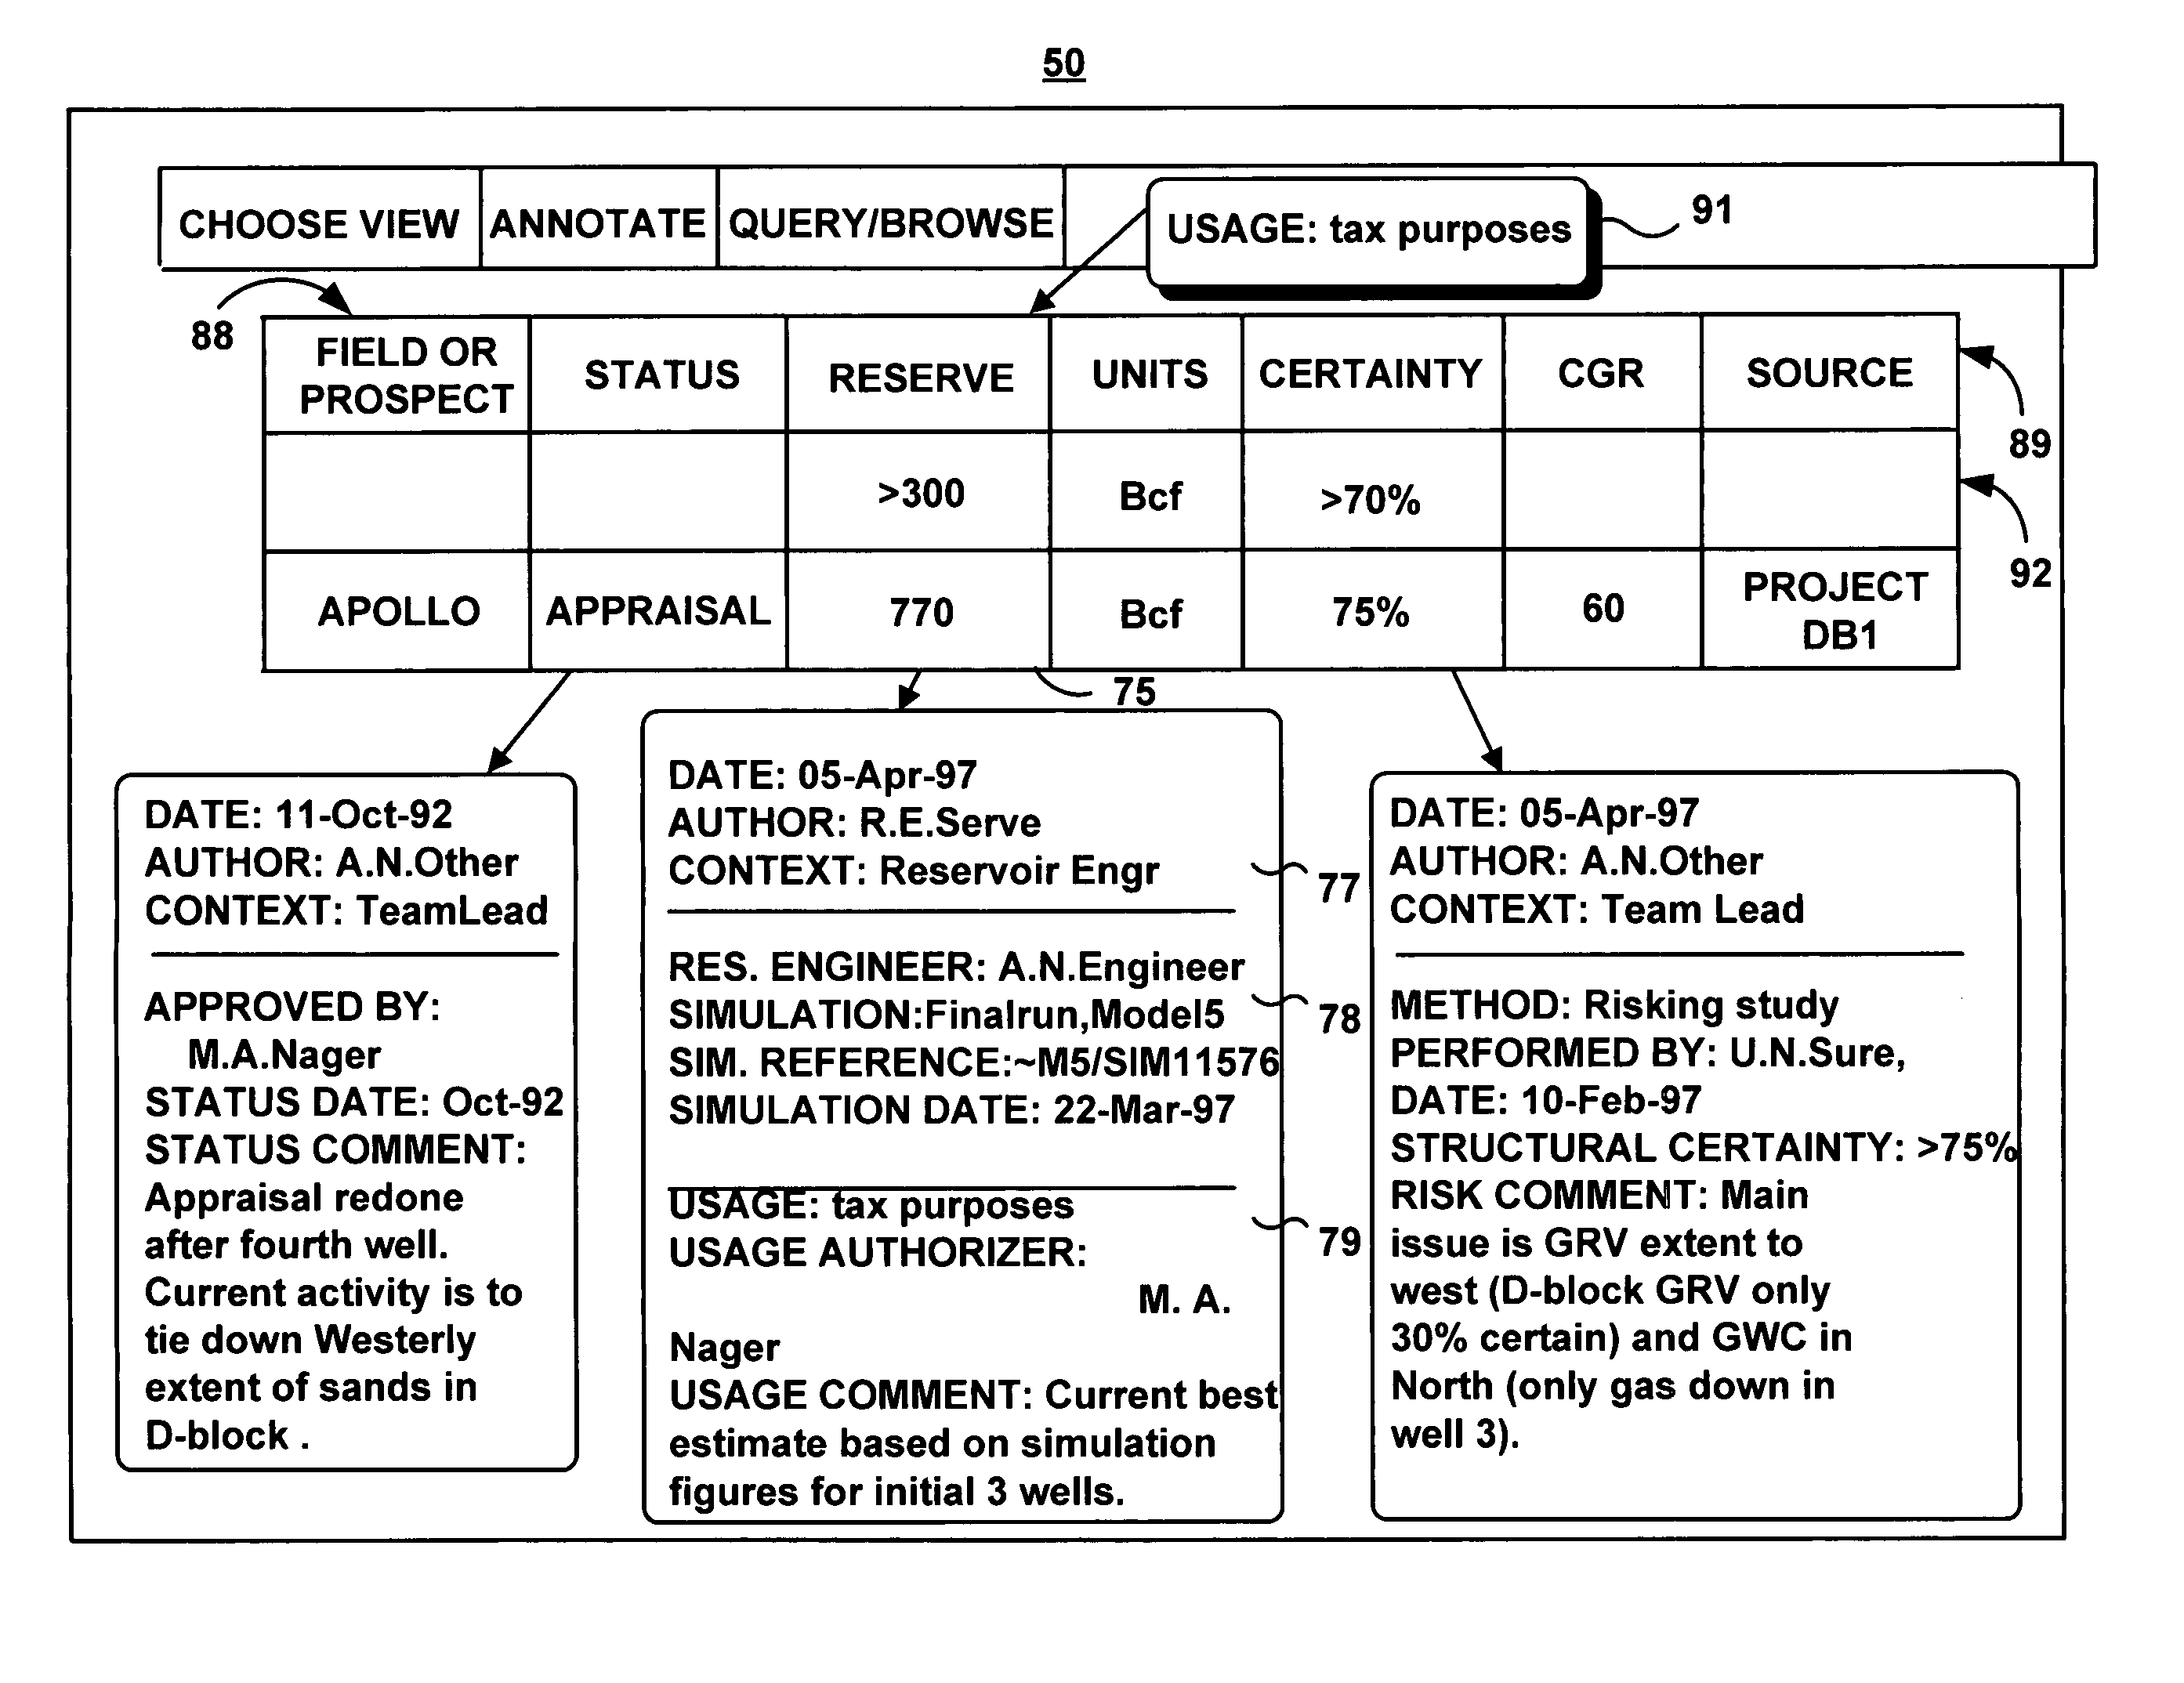 System for annotating a data object by creating an interface based on a selected annotation structure